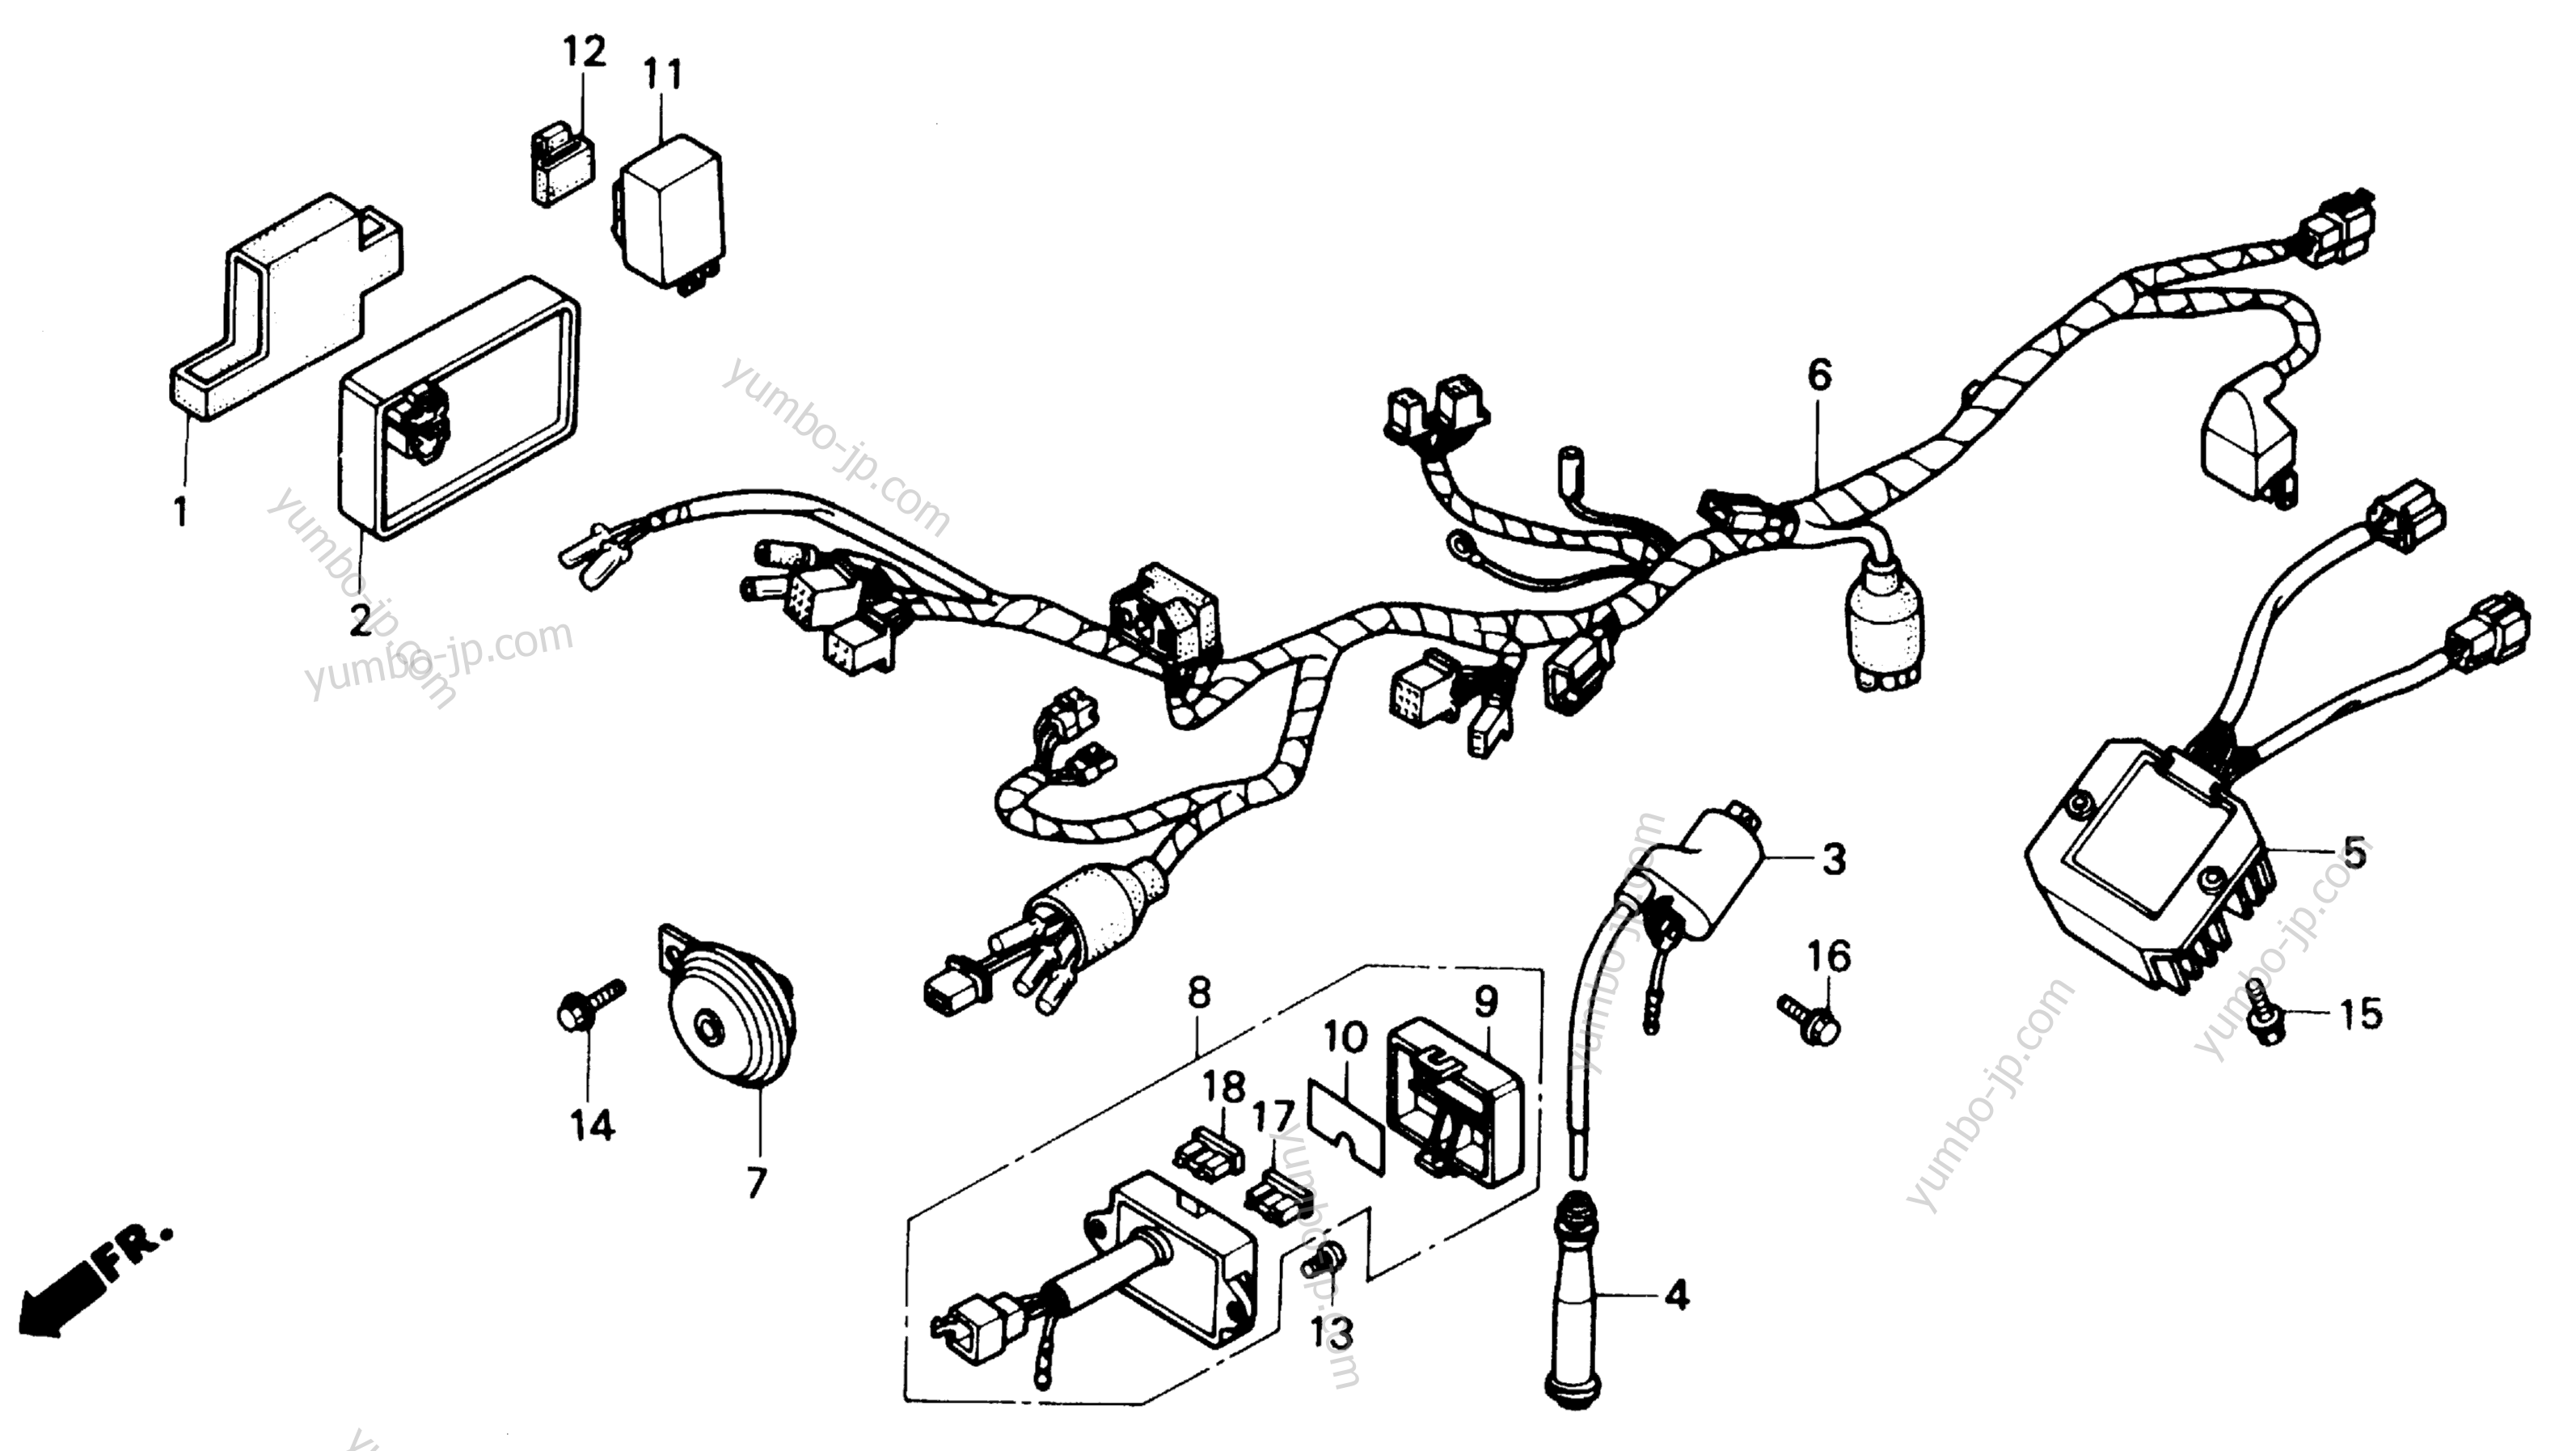 WIRE HARNESS for motorcycles HONDA NX650 A 1989 year